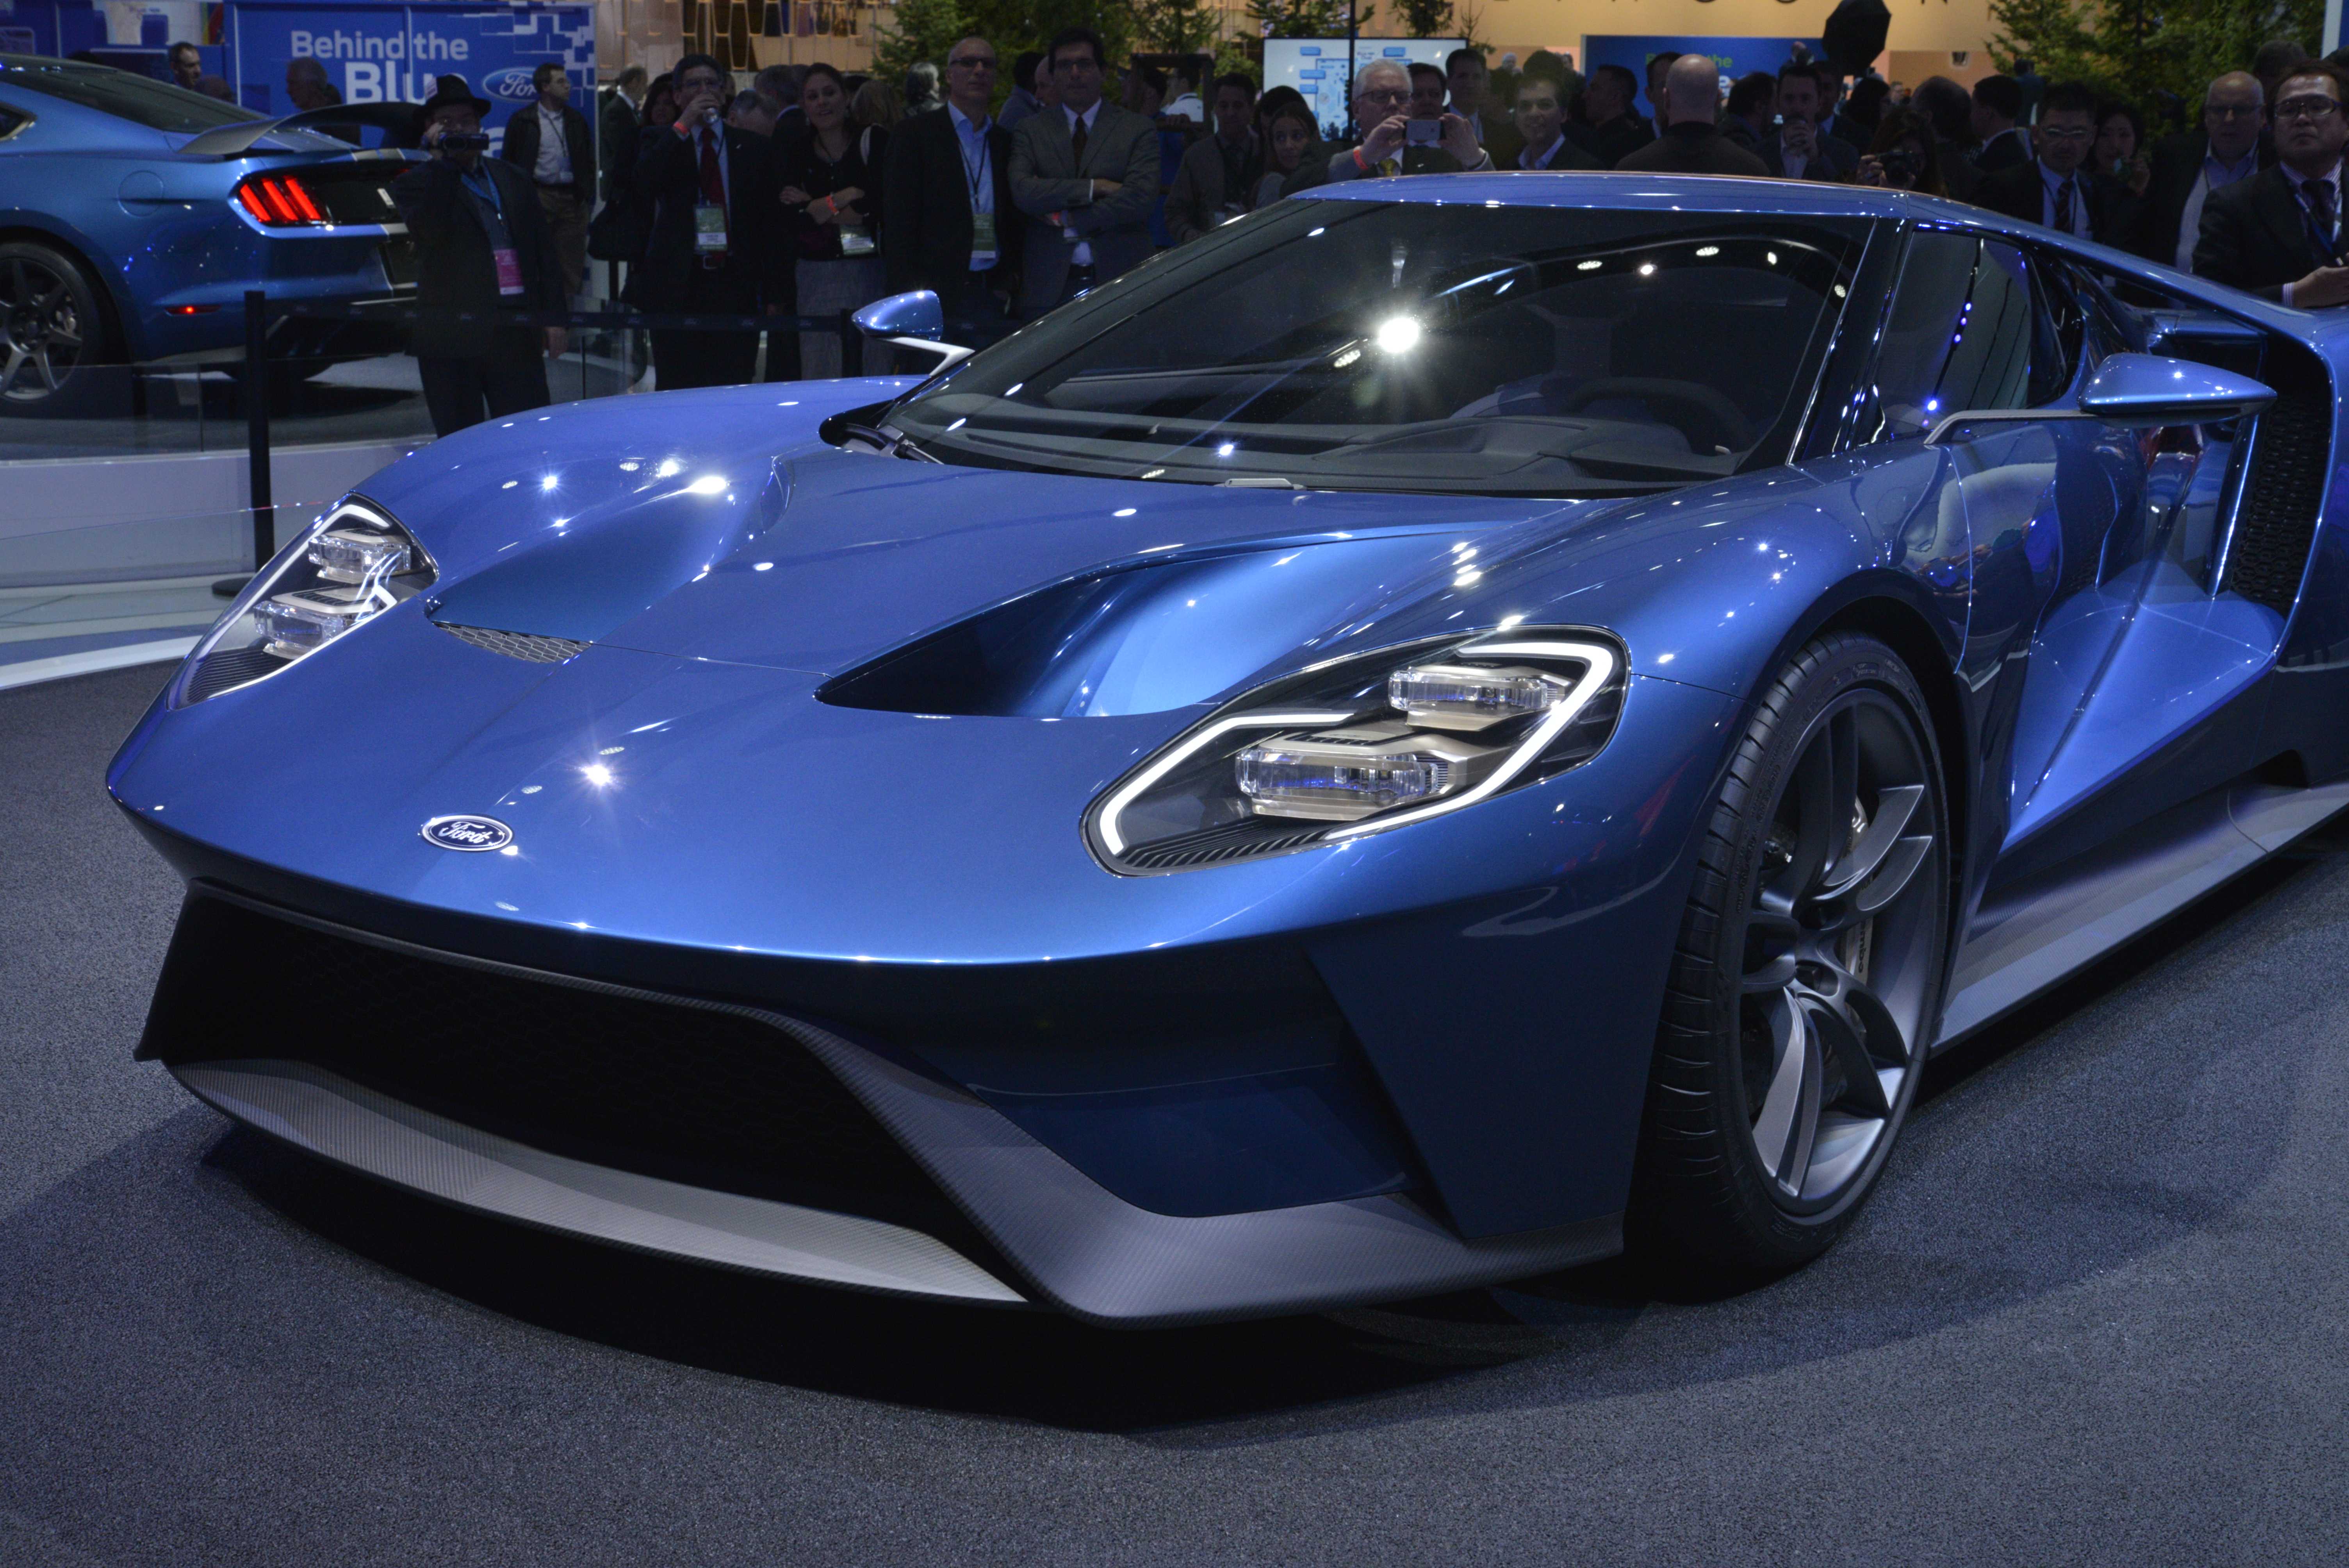 Сайт мир машин. Ford gt 2015. Ford gt 2016. Ford gt 2017. Ford gt 2017 Supercar.